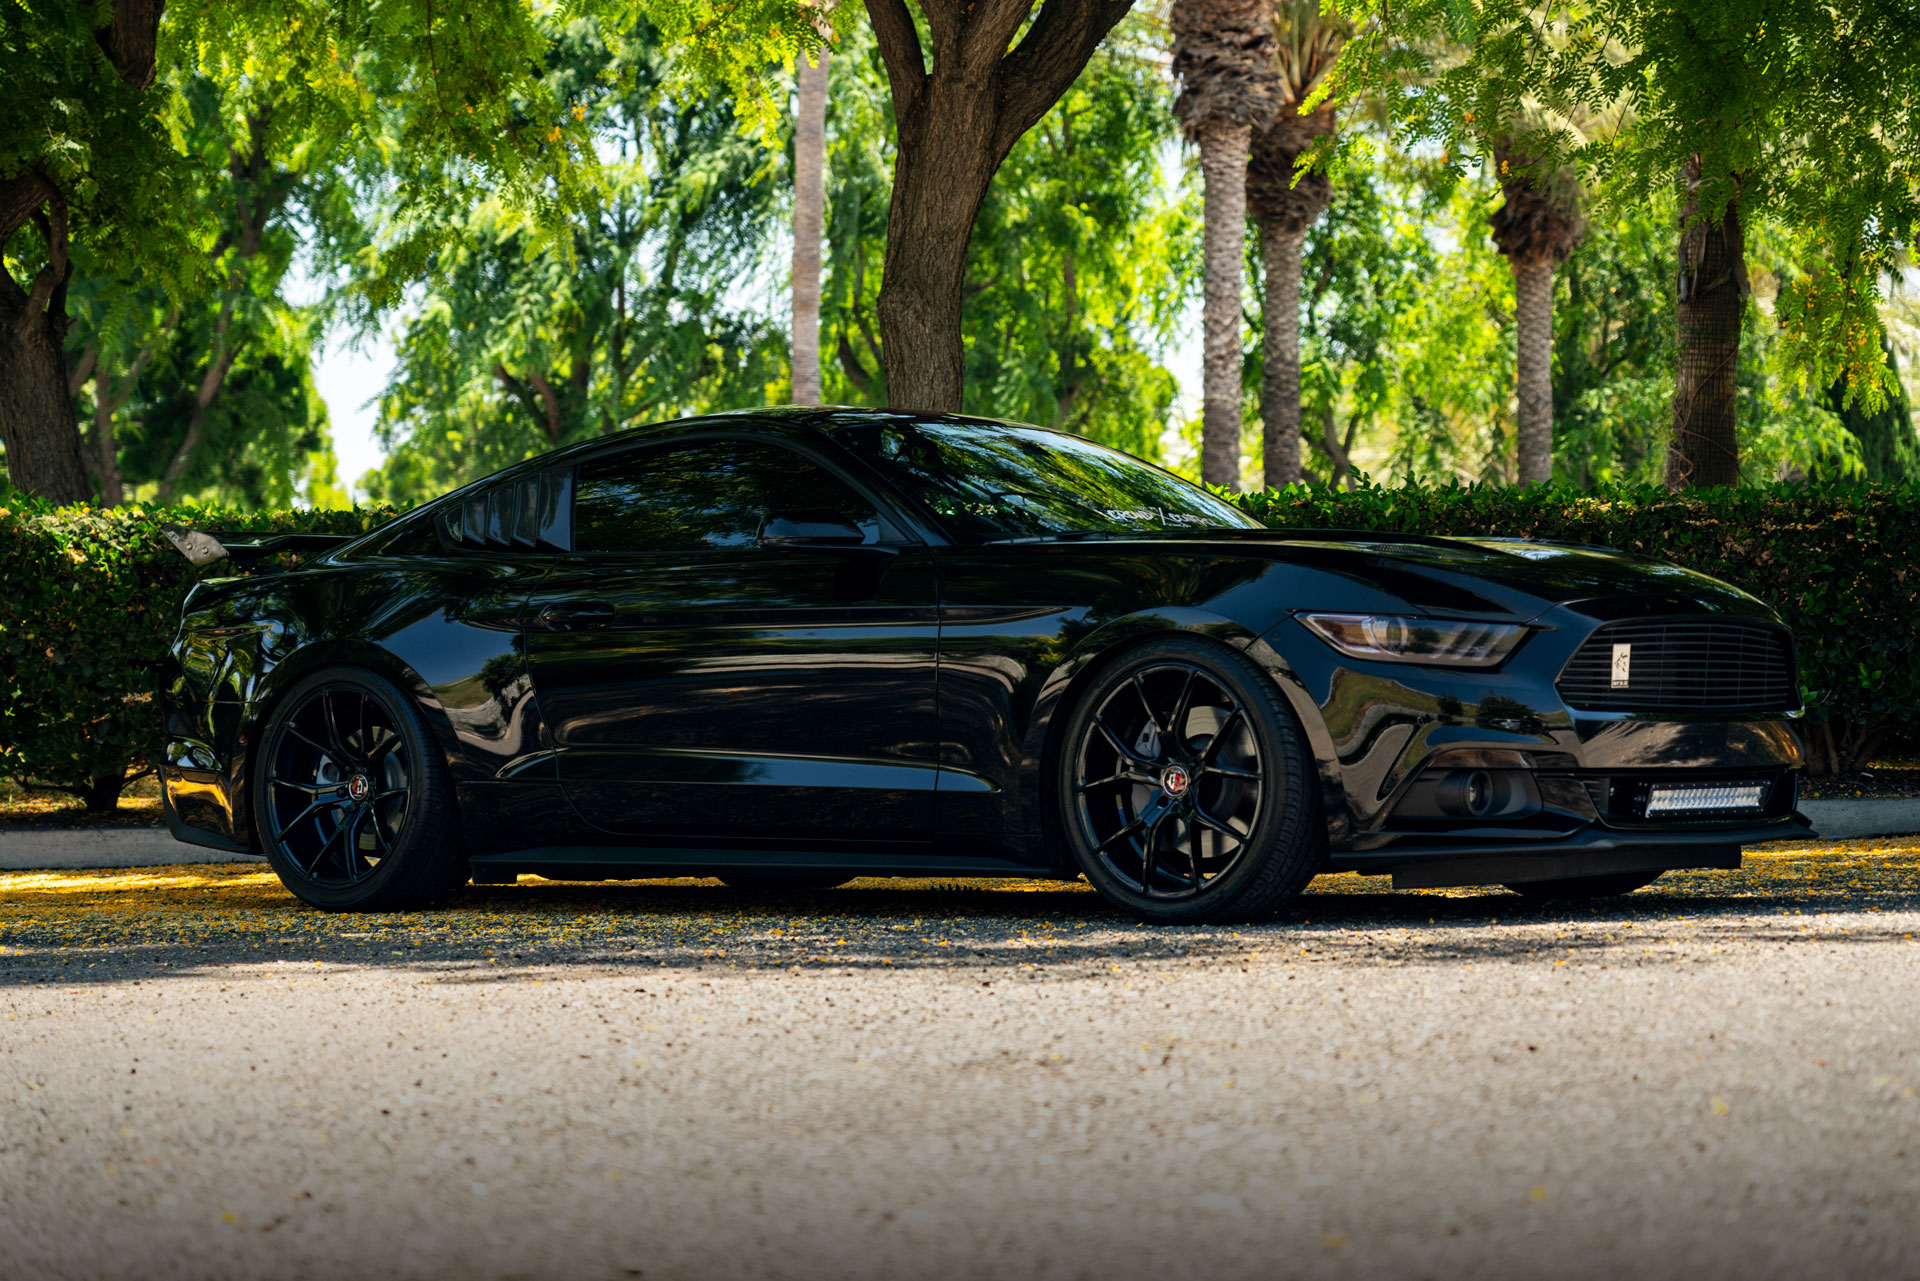 Curva Concepts C42 Aftermarket Wheels on a Blacked Out Ford Mustang GT